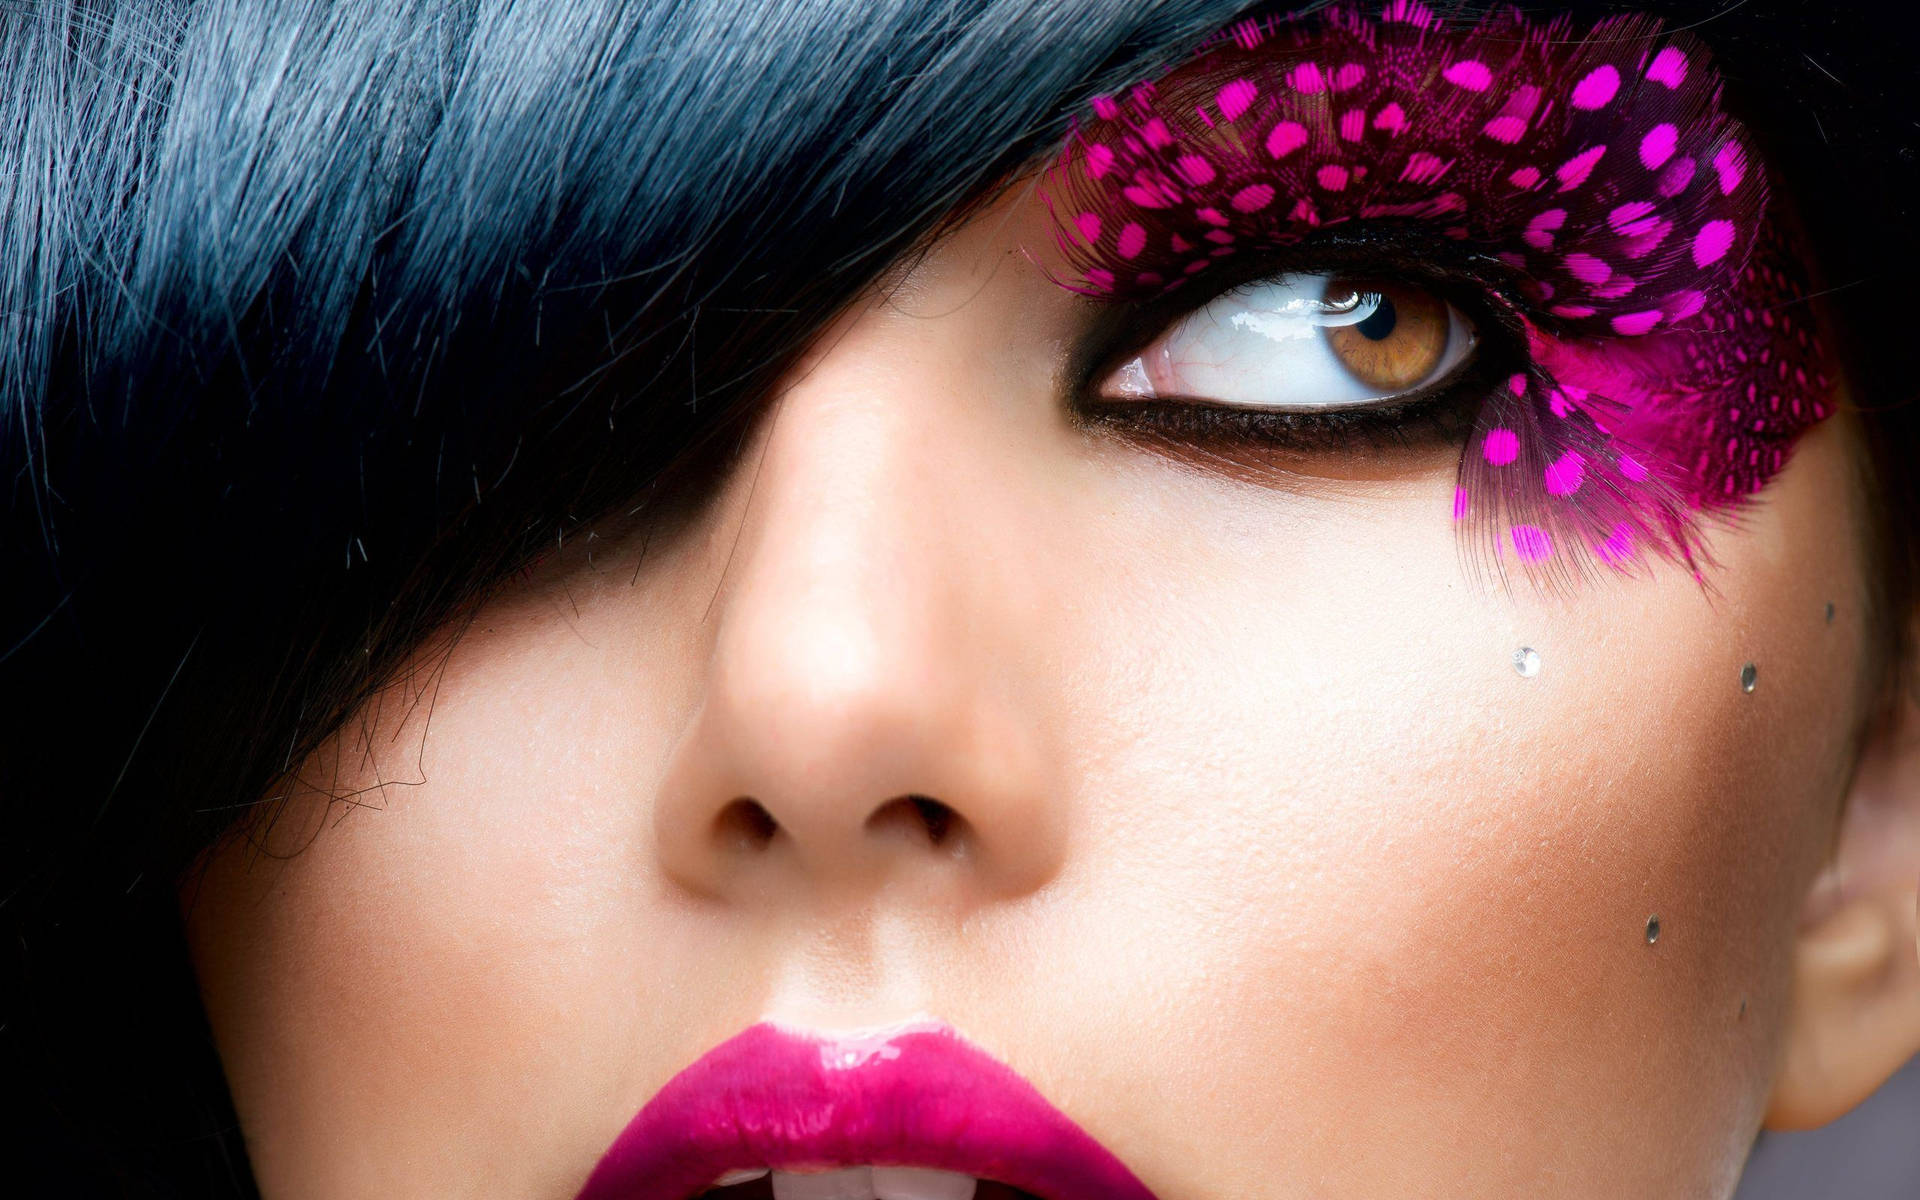 Enchanting Butterfly Inspired Makeup with Dramatic Lashes Wallpaper